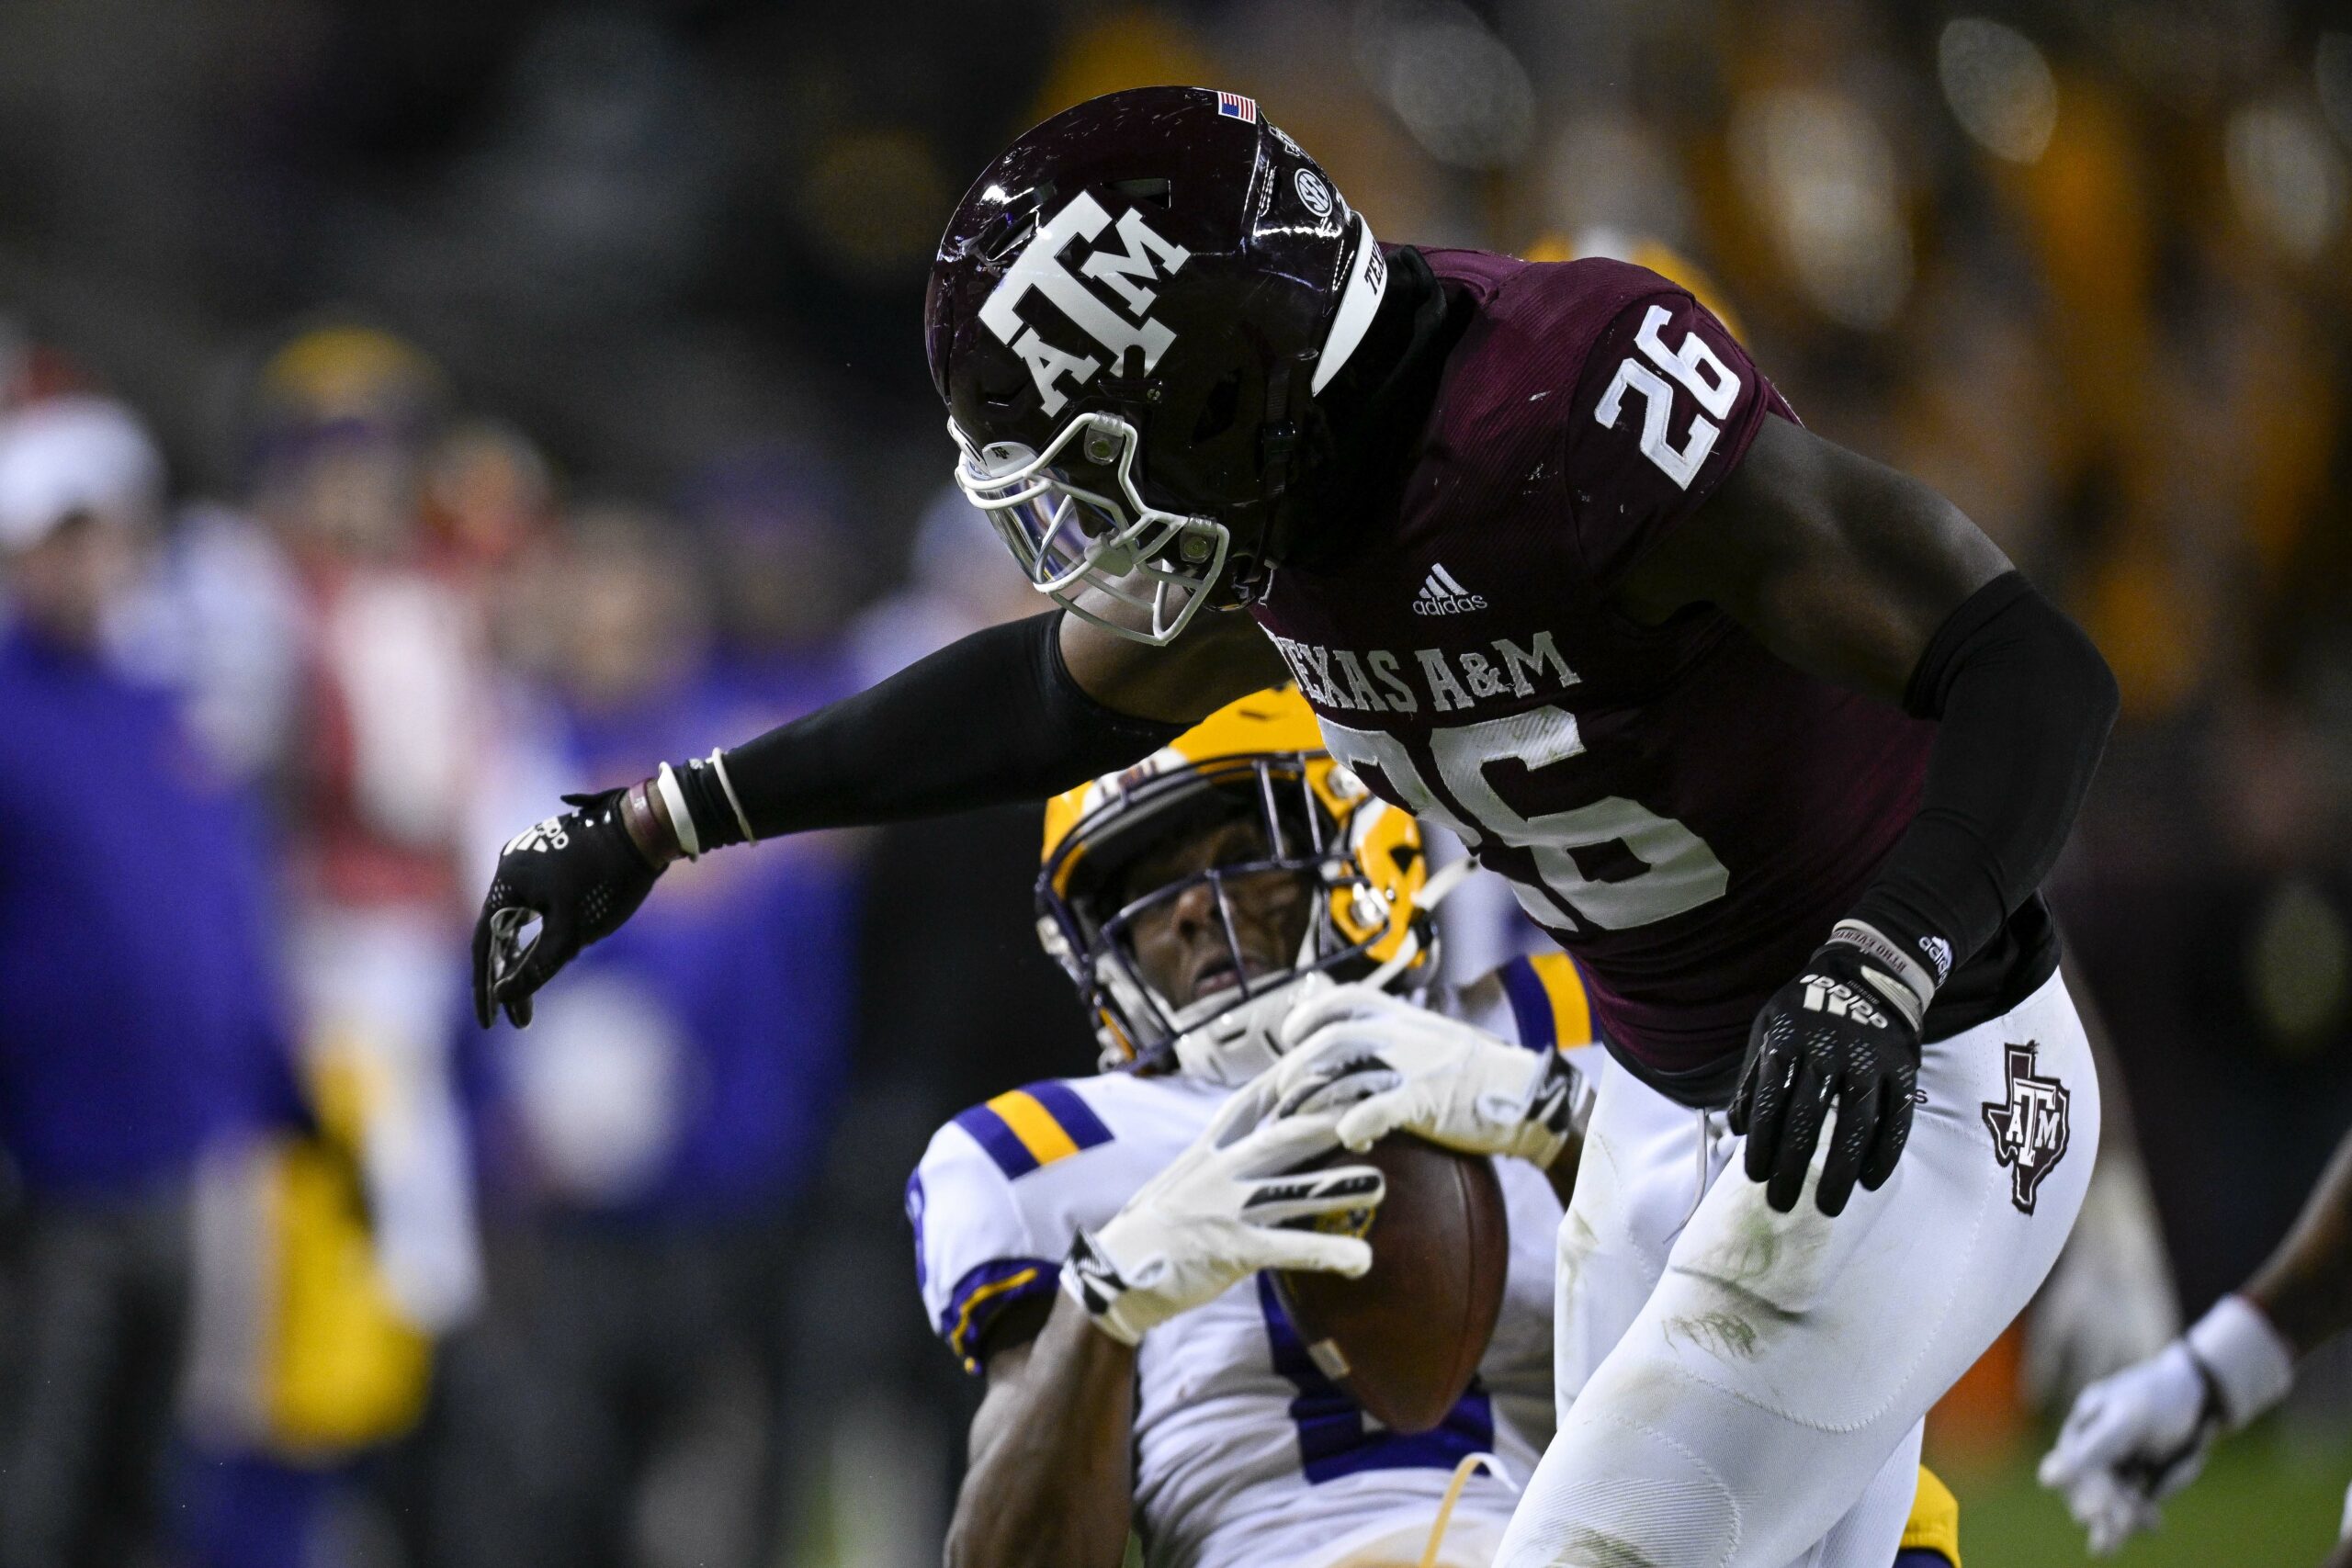 Bleacher Report lists Aggies safety Demani Richardson as the “Top senior” at the position for the 2023 season